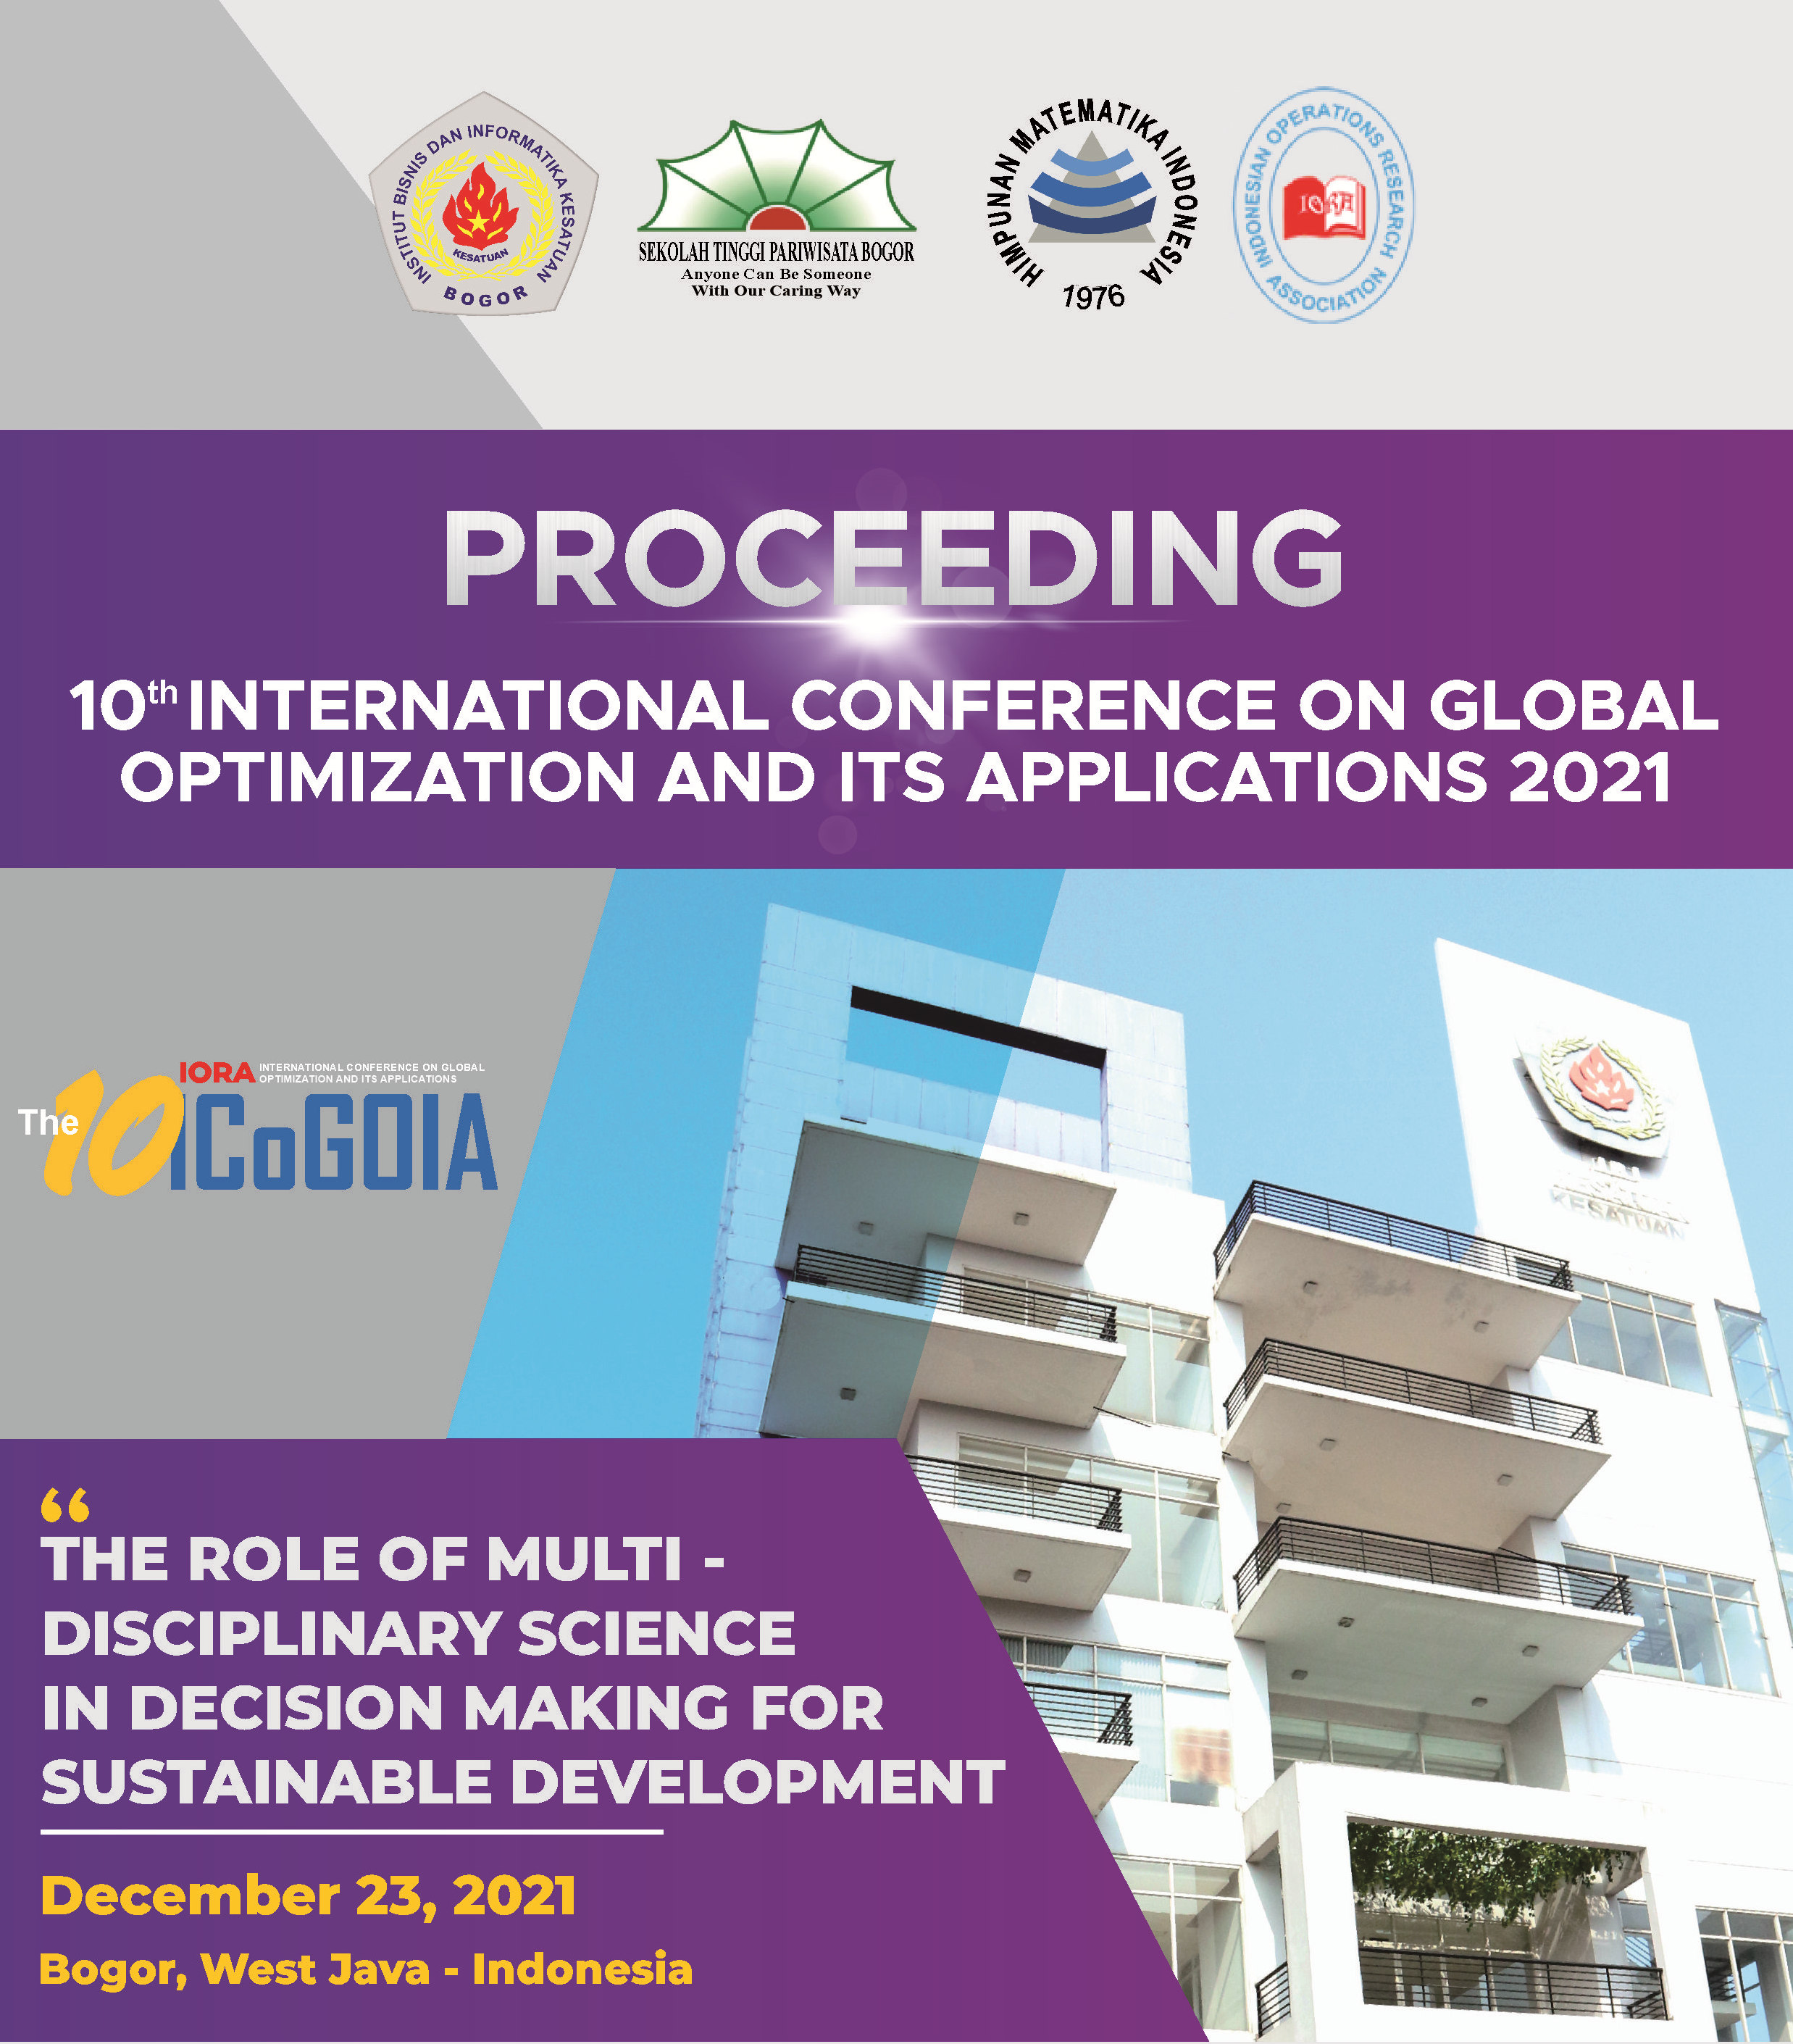 					View Proceeding of International Conference on Global Optimization and Its Application 2021
				